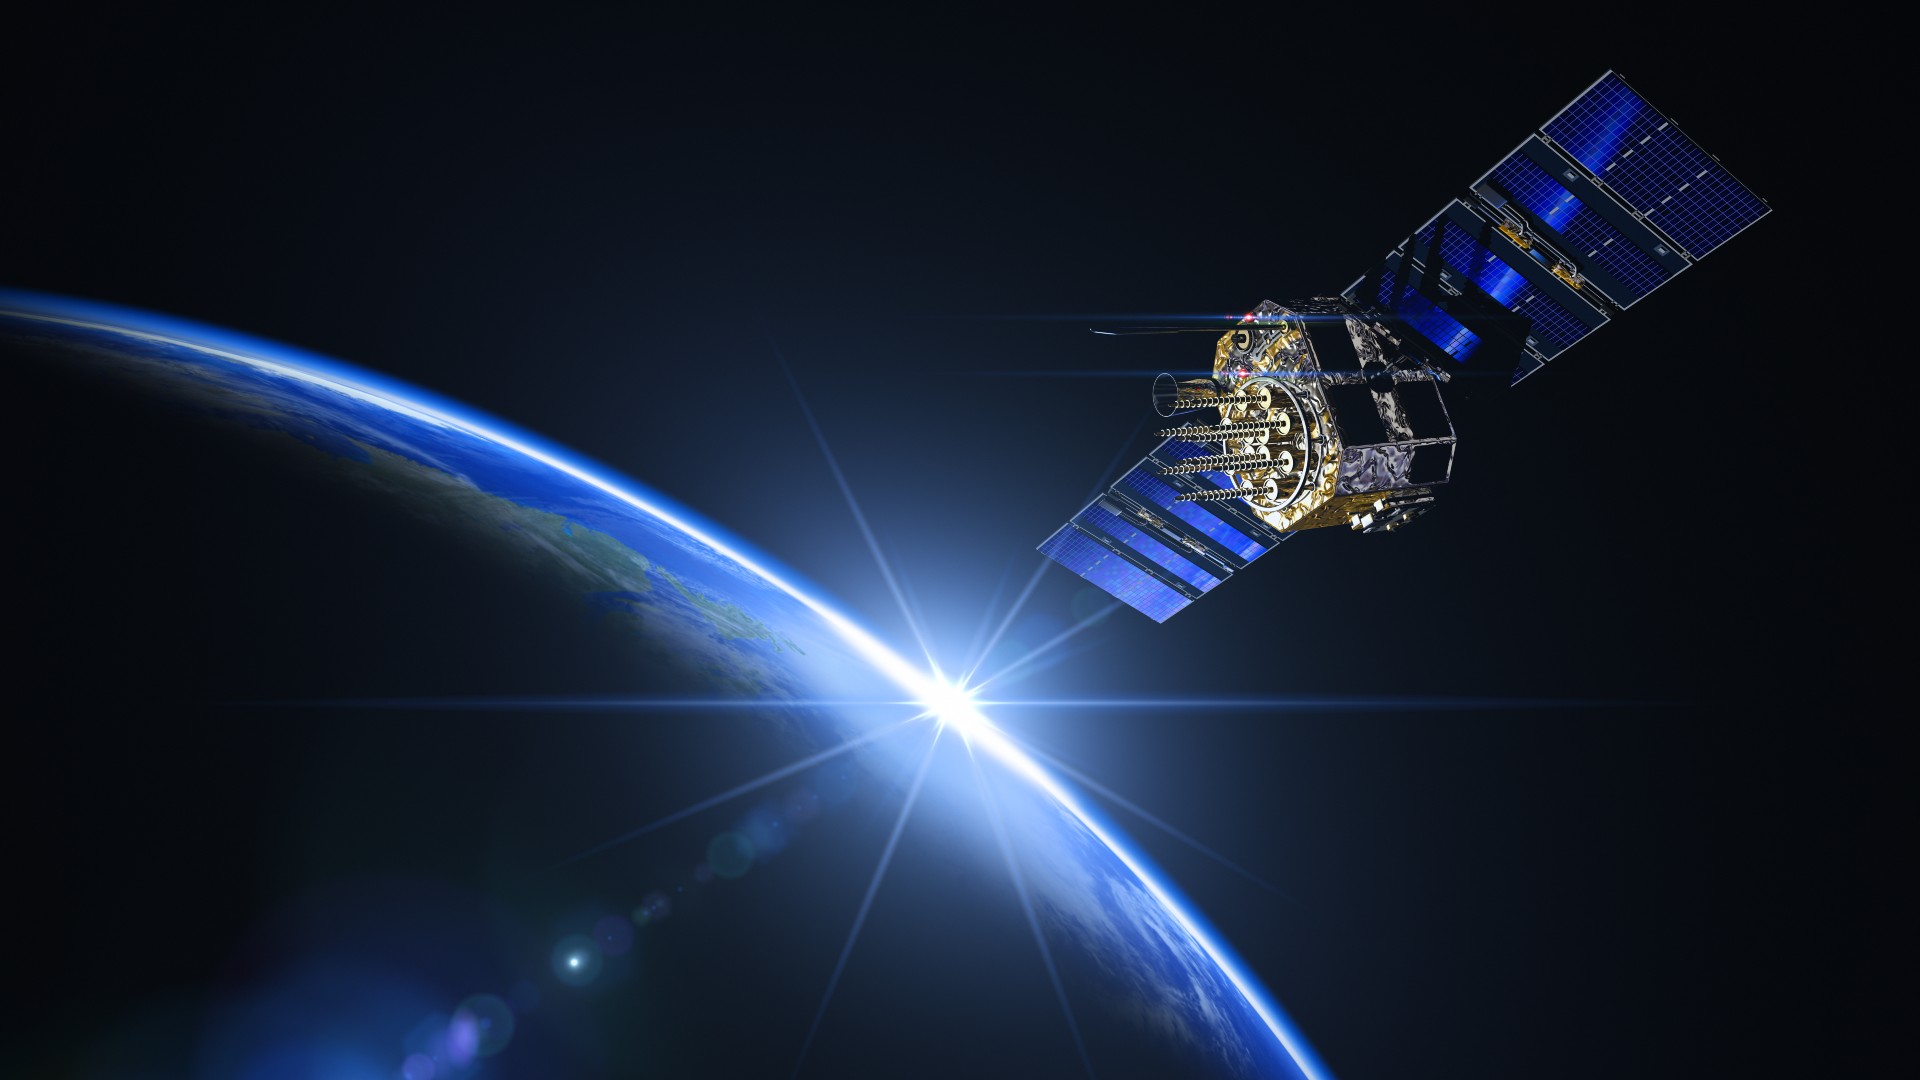 Satellite and sunrise in space. BlackJack3D via Getty Images.